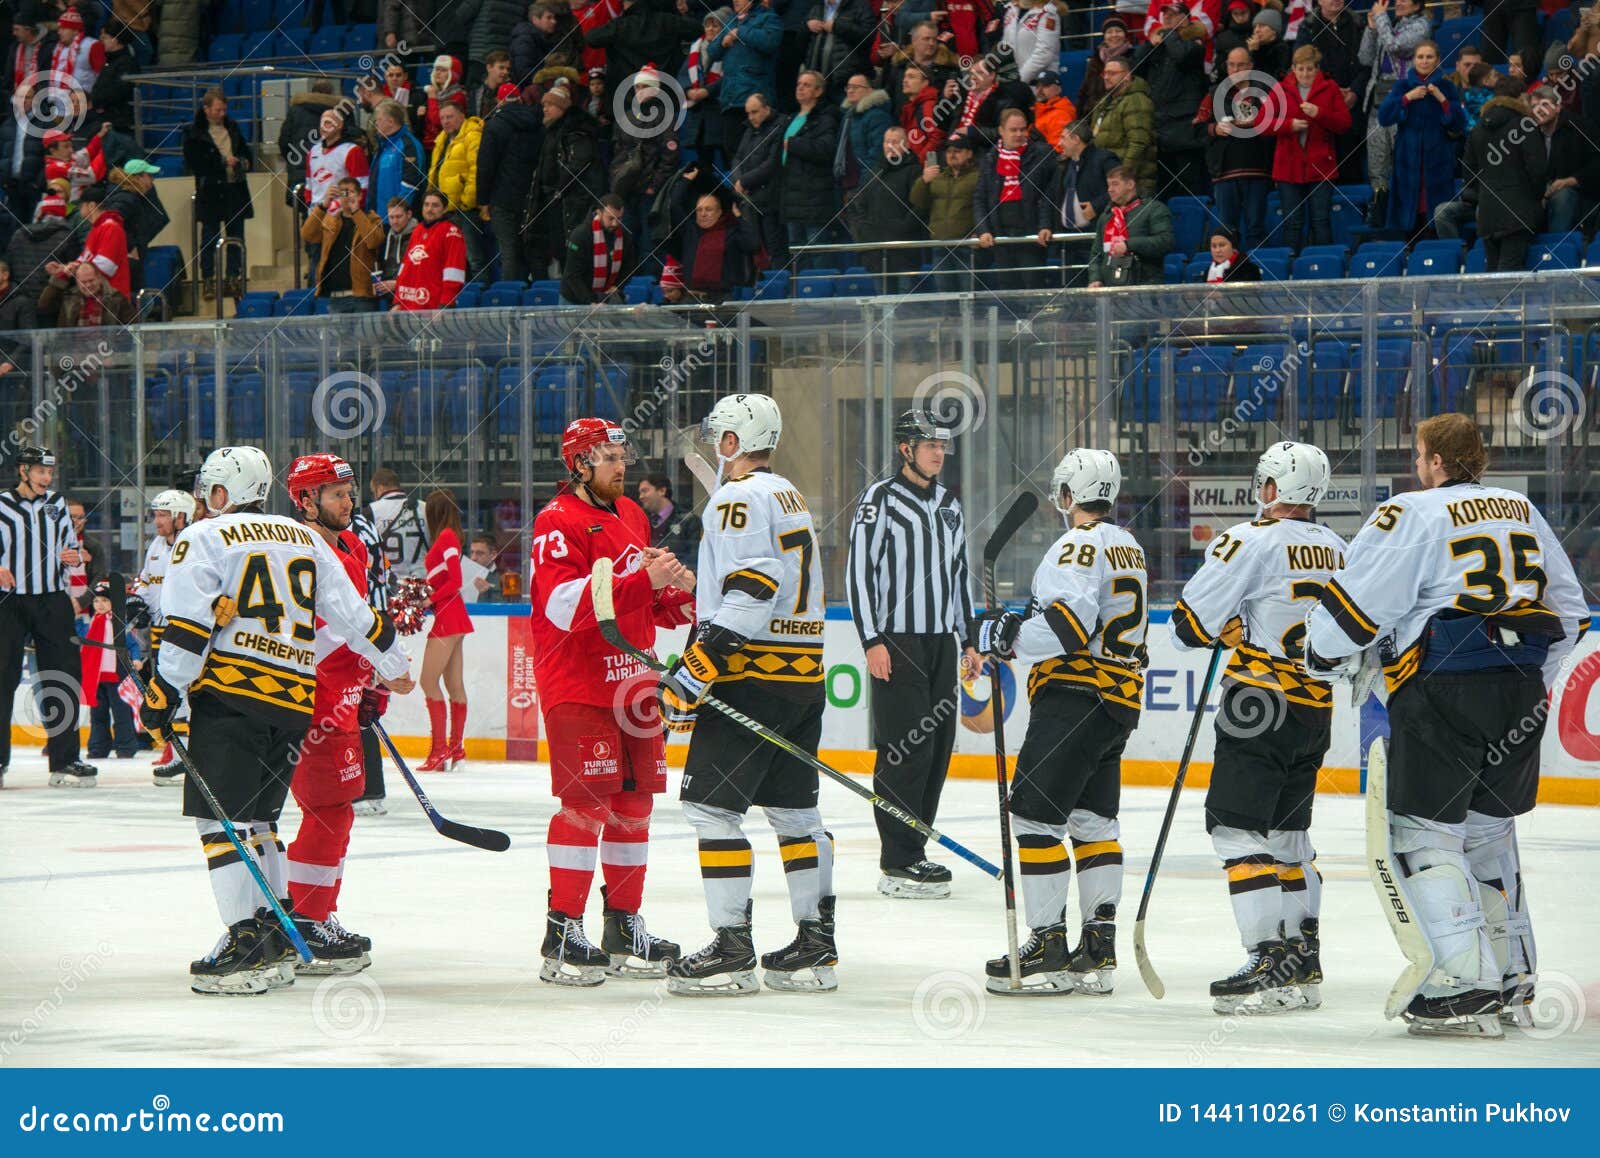 Cheers Rivals After The Hockey Match Spartak Vs Severstal Cherepovets Editorial Photo Image Of